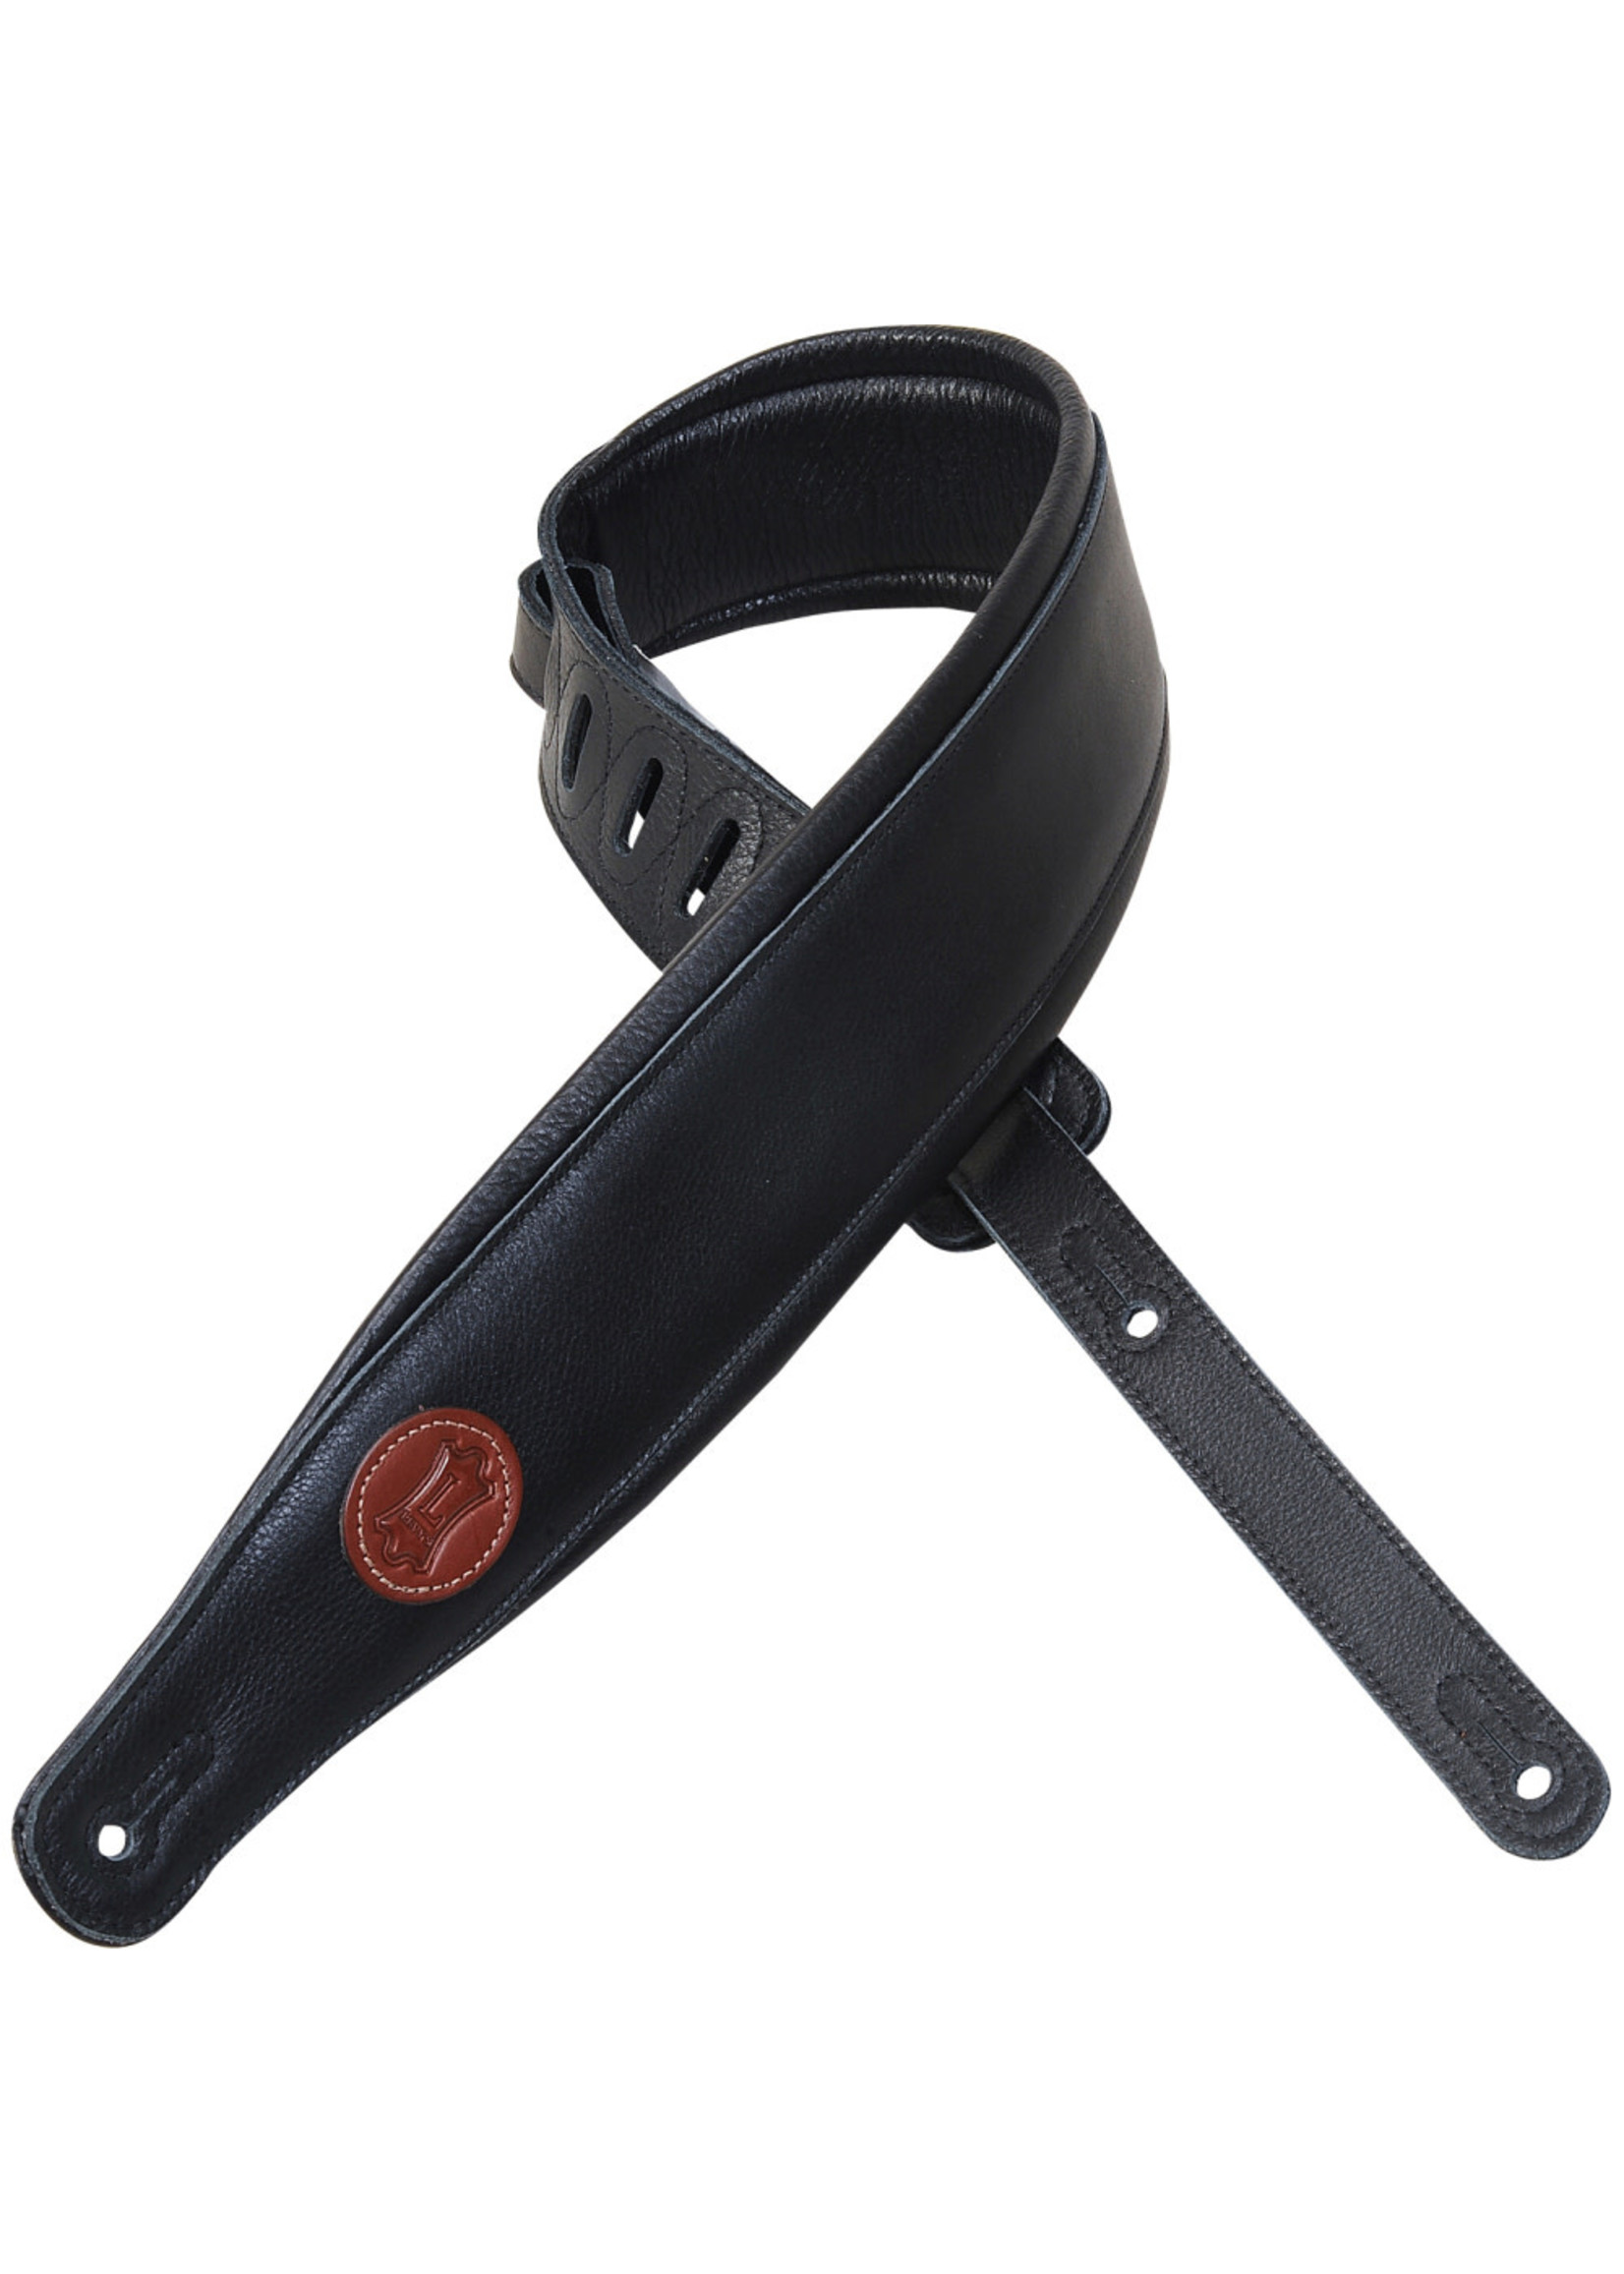 Levys Levy's MSS2-BLK Garment Leather Guitar Strap, Black